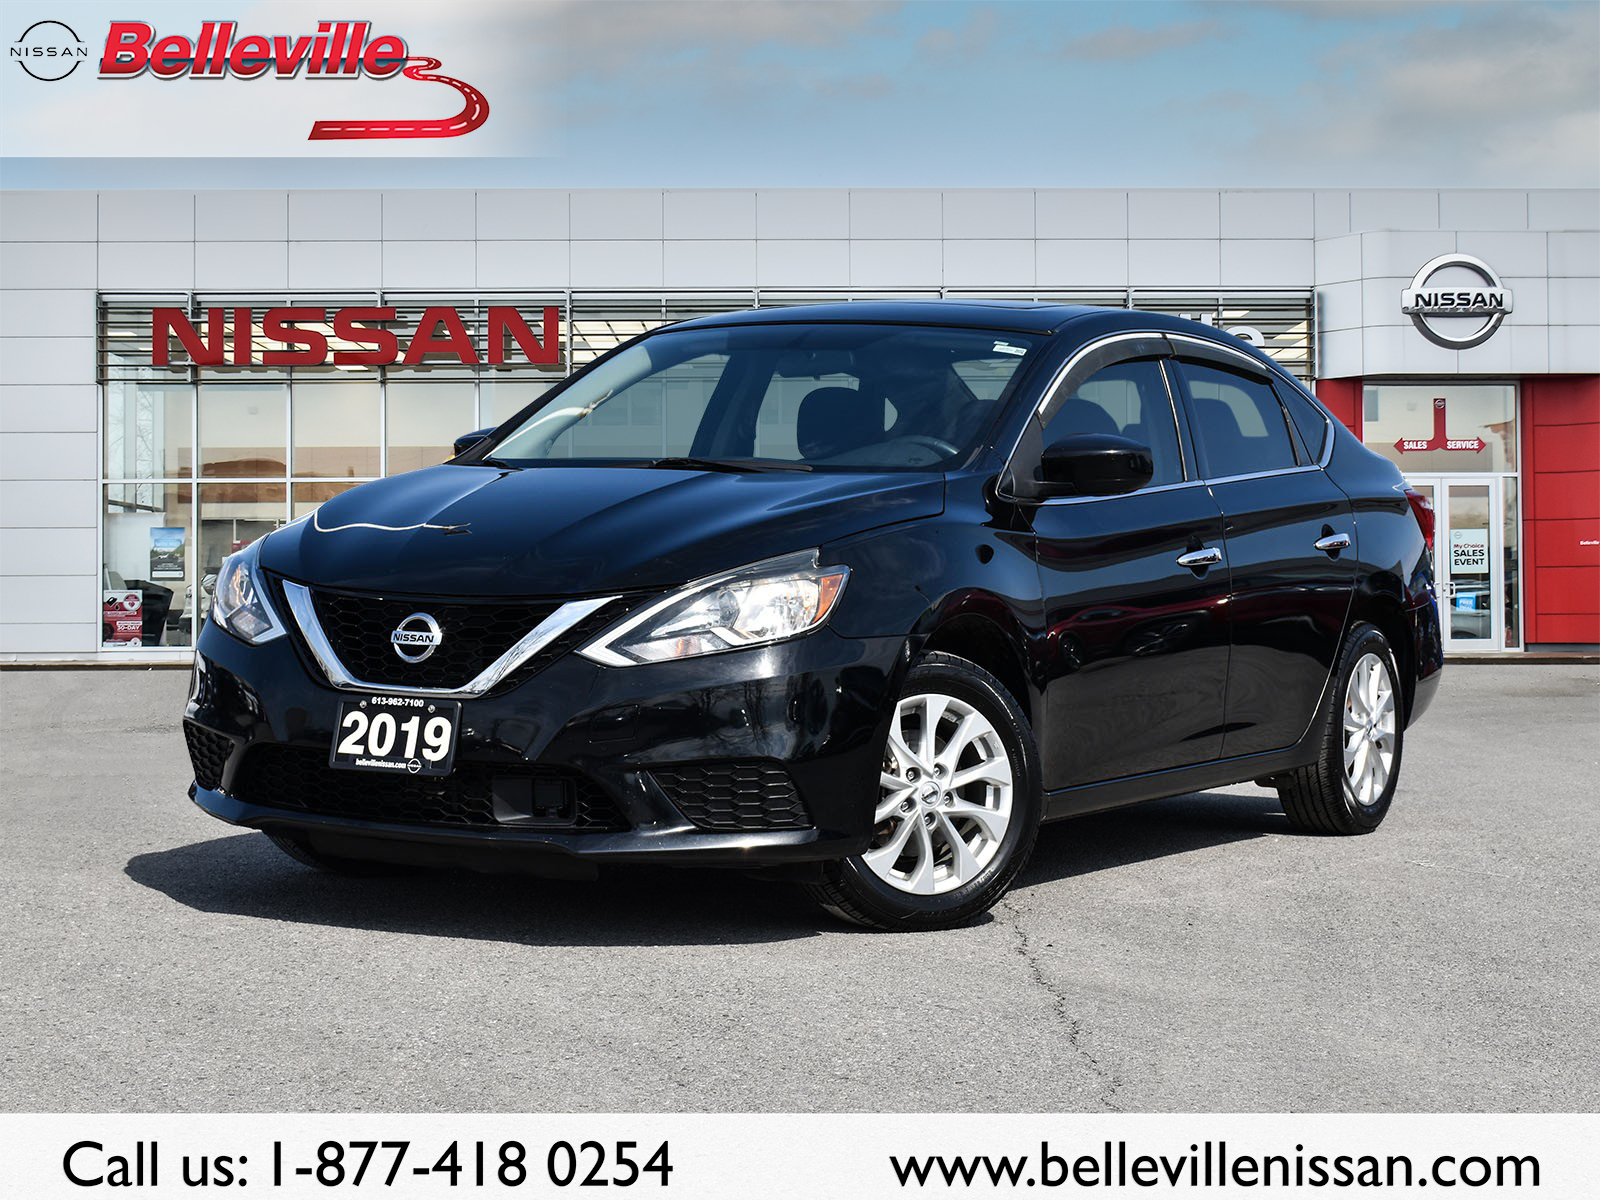 2019 Nissan Sentra SV-LOCAL TRADE, WELL SERVICED!